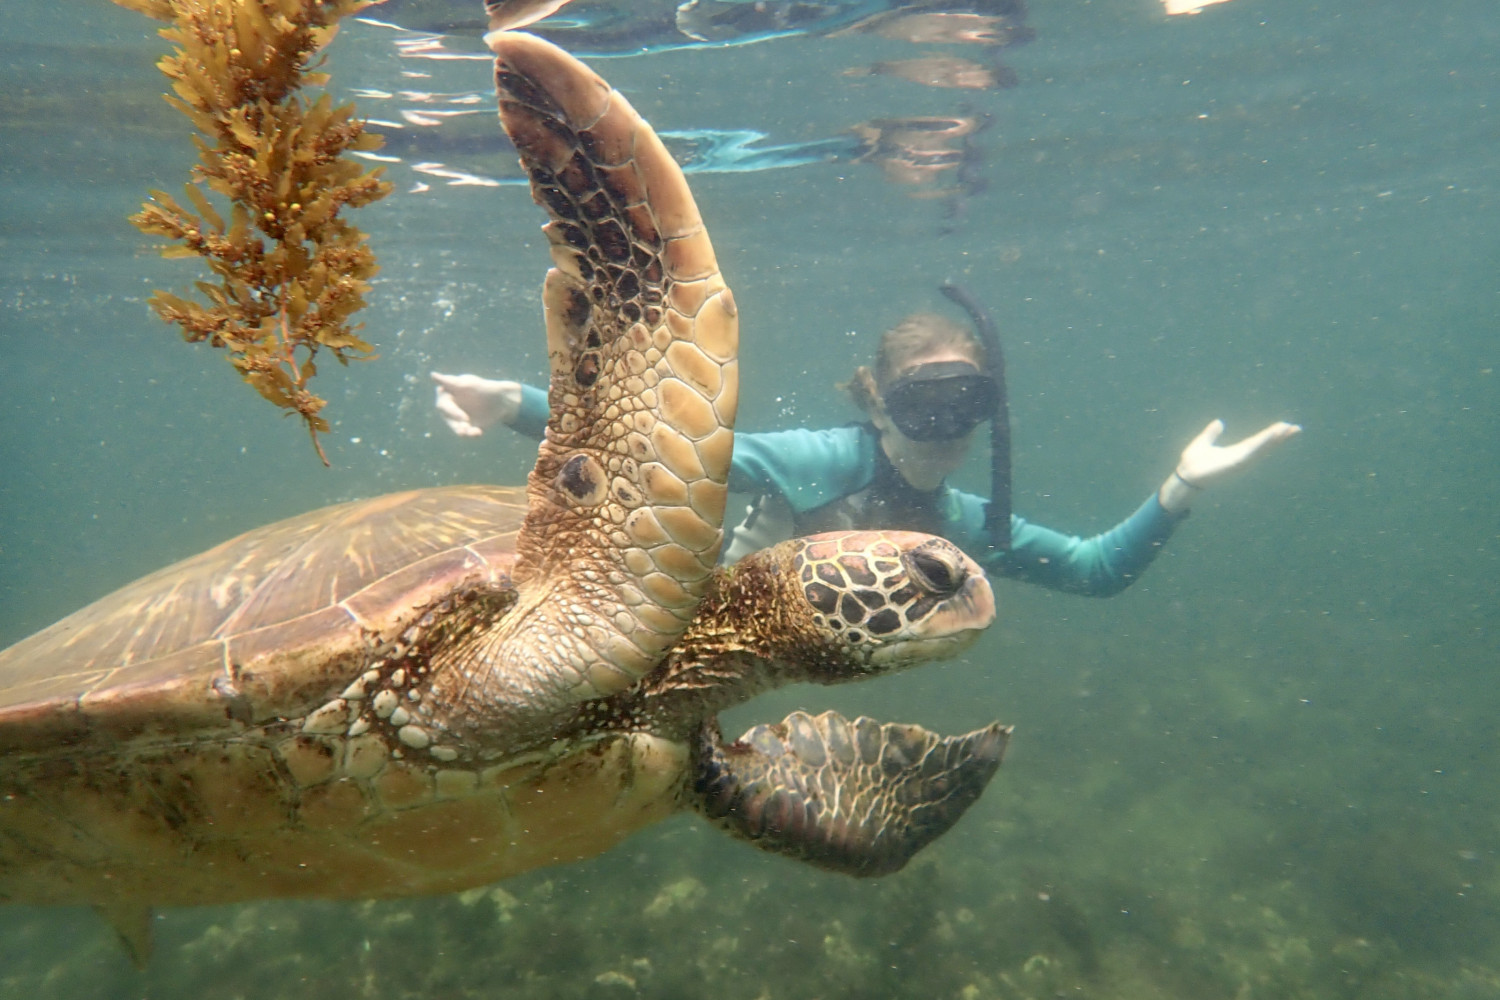 A Carthage student swims with a giant tortoise on a study tour to the Galápagos Islands.